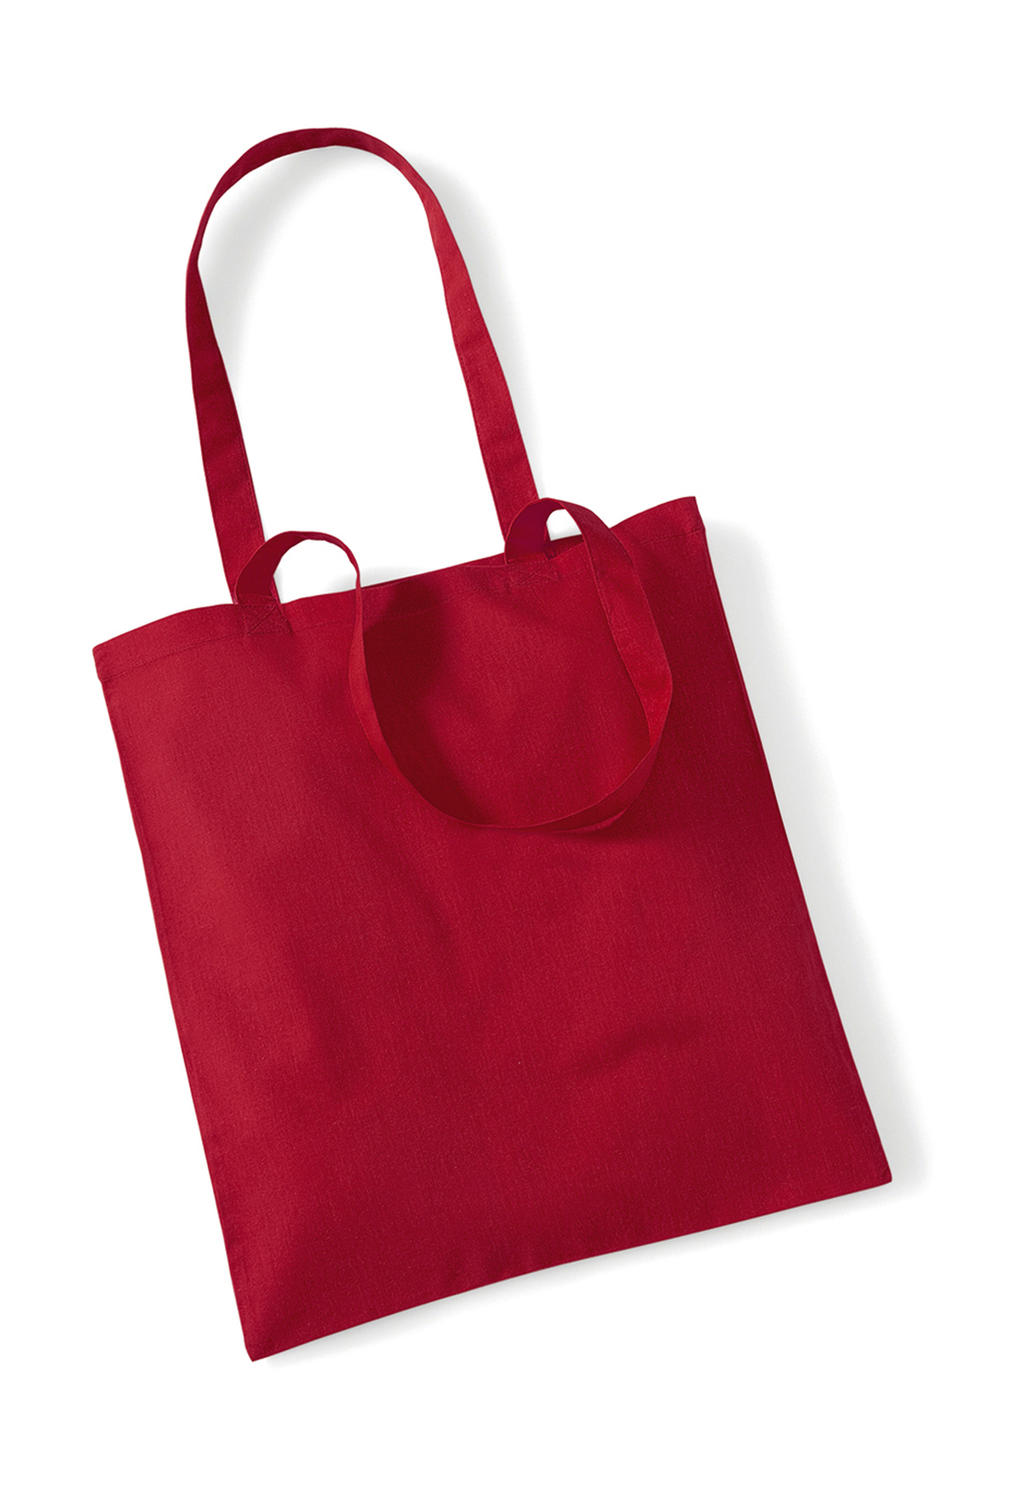  Bag for Life - Long Handles in Farbe Classic Red